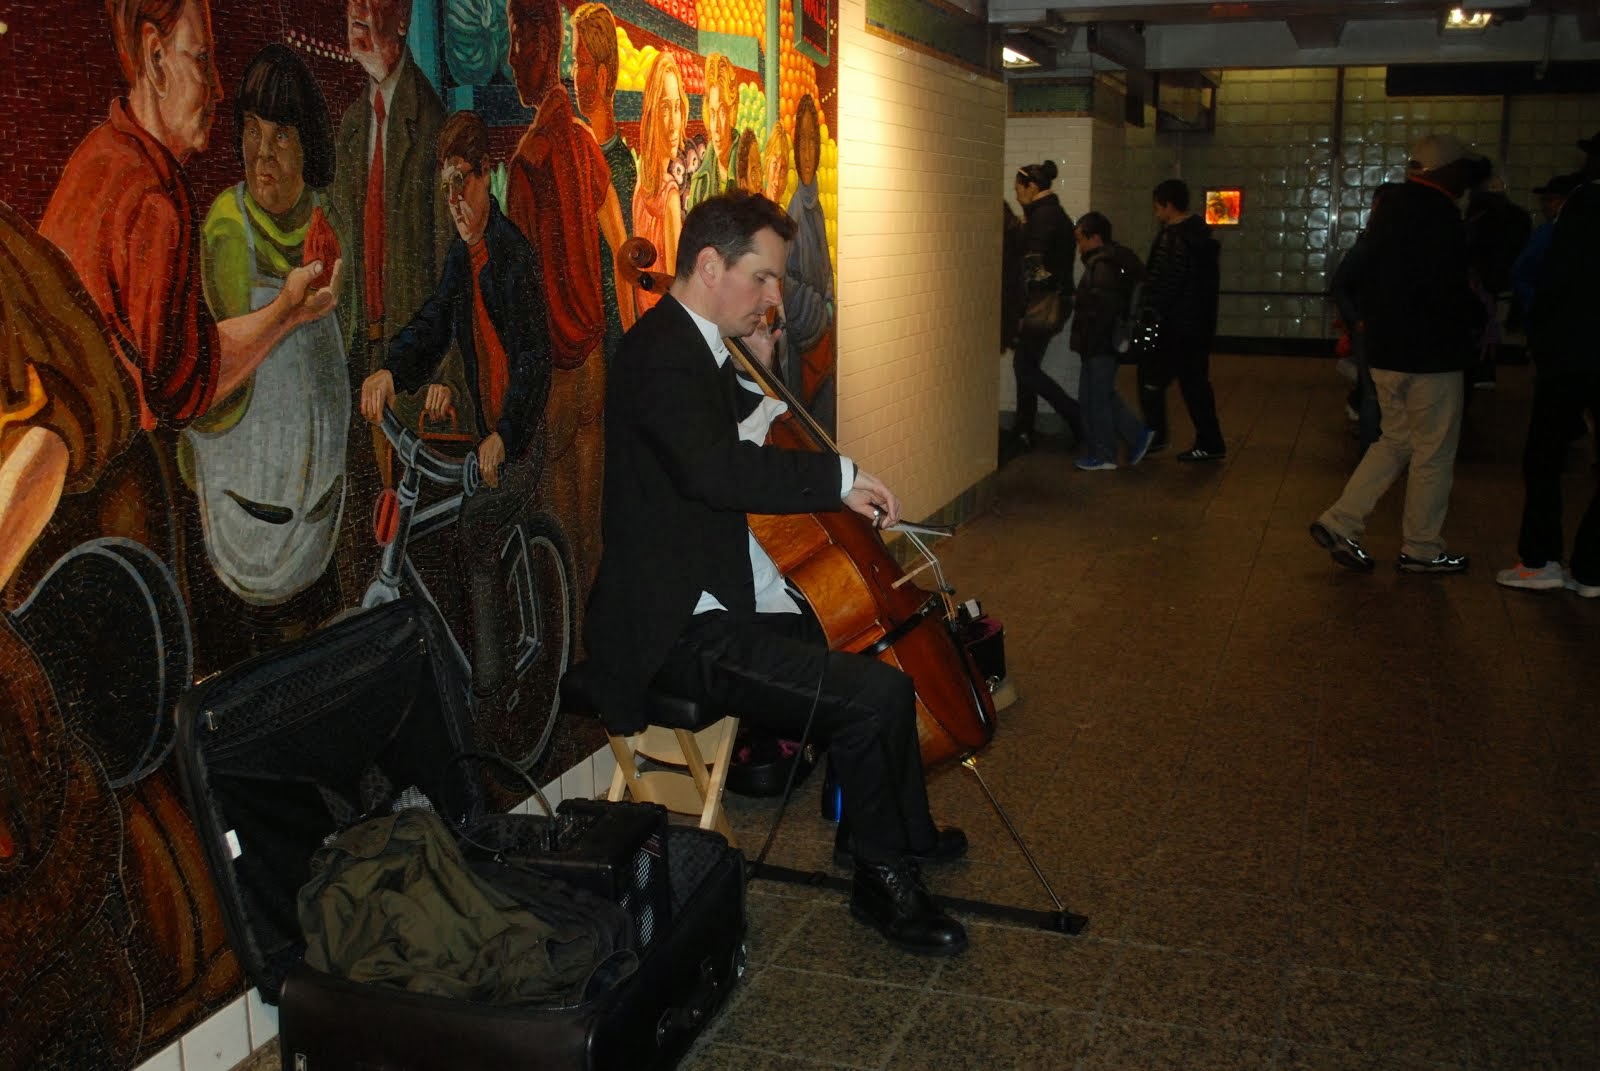 Cellist in NYC Subway